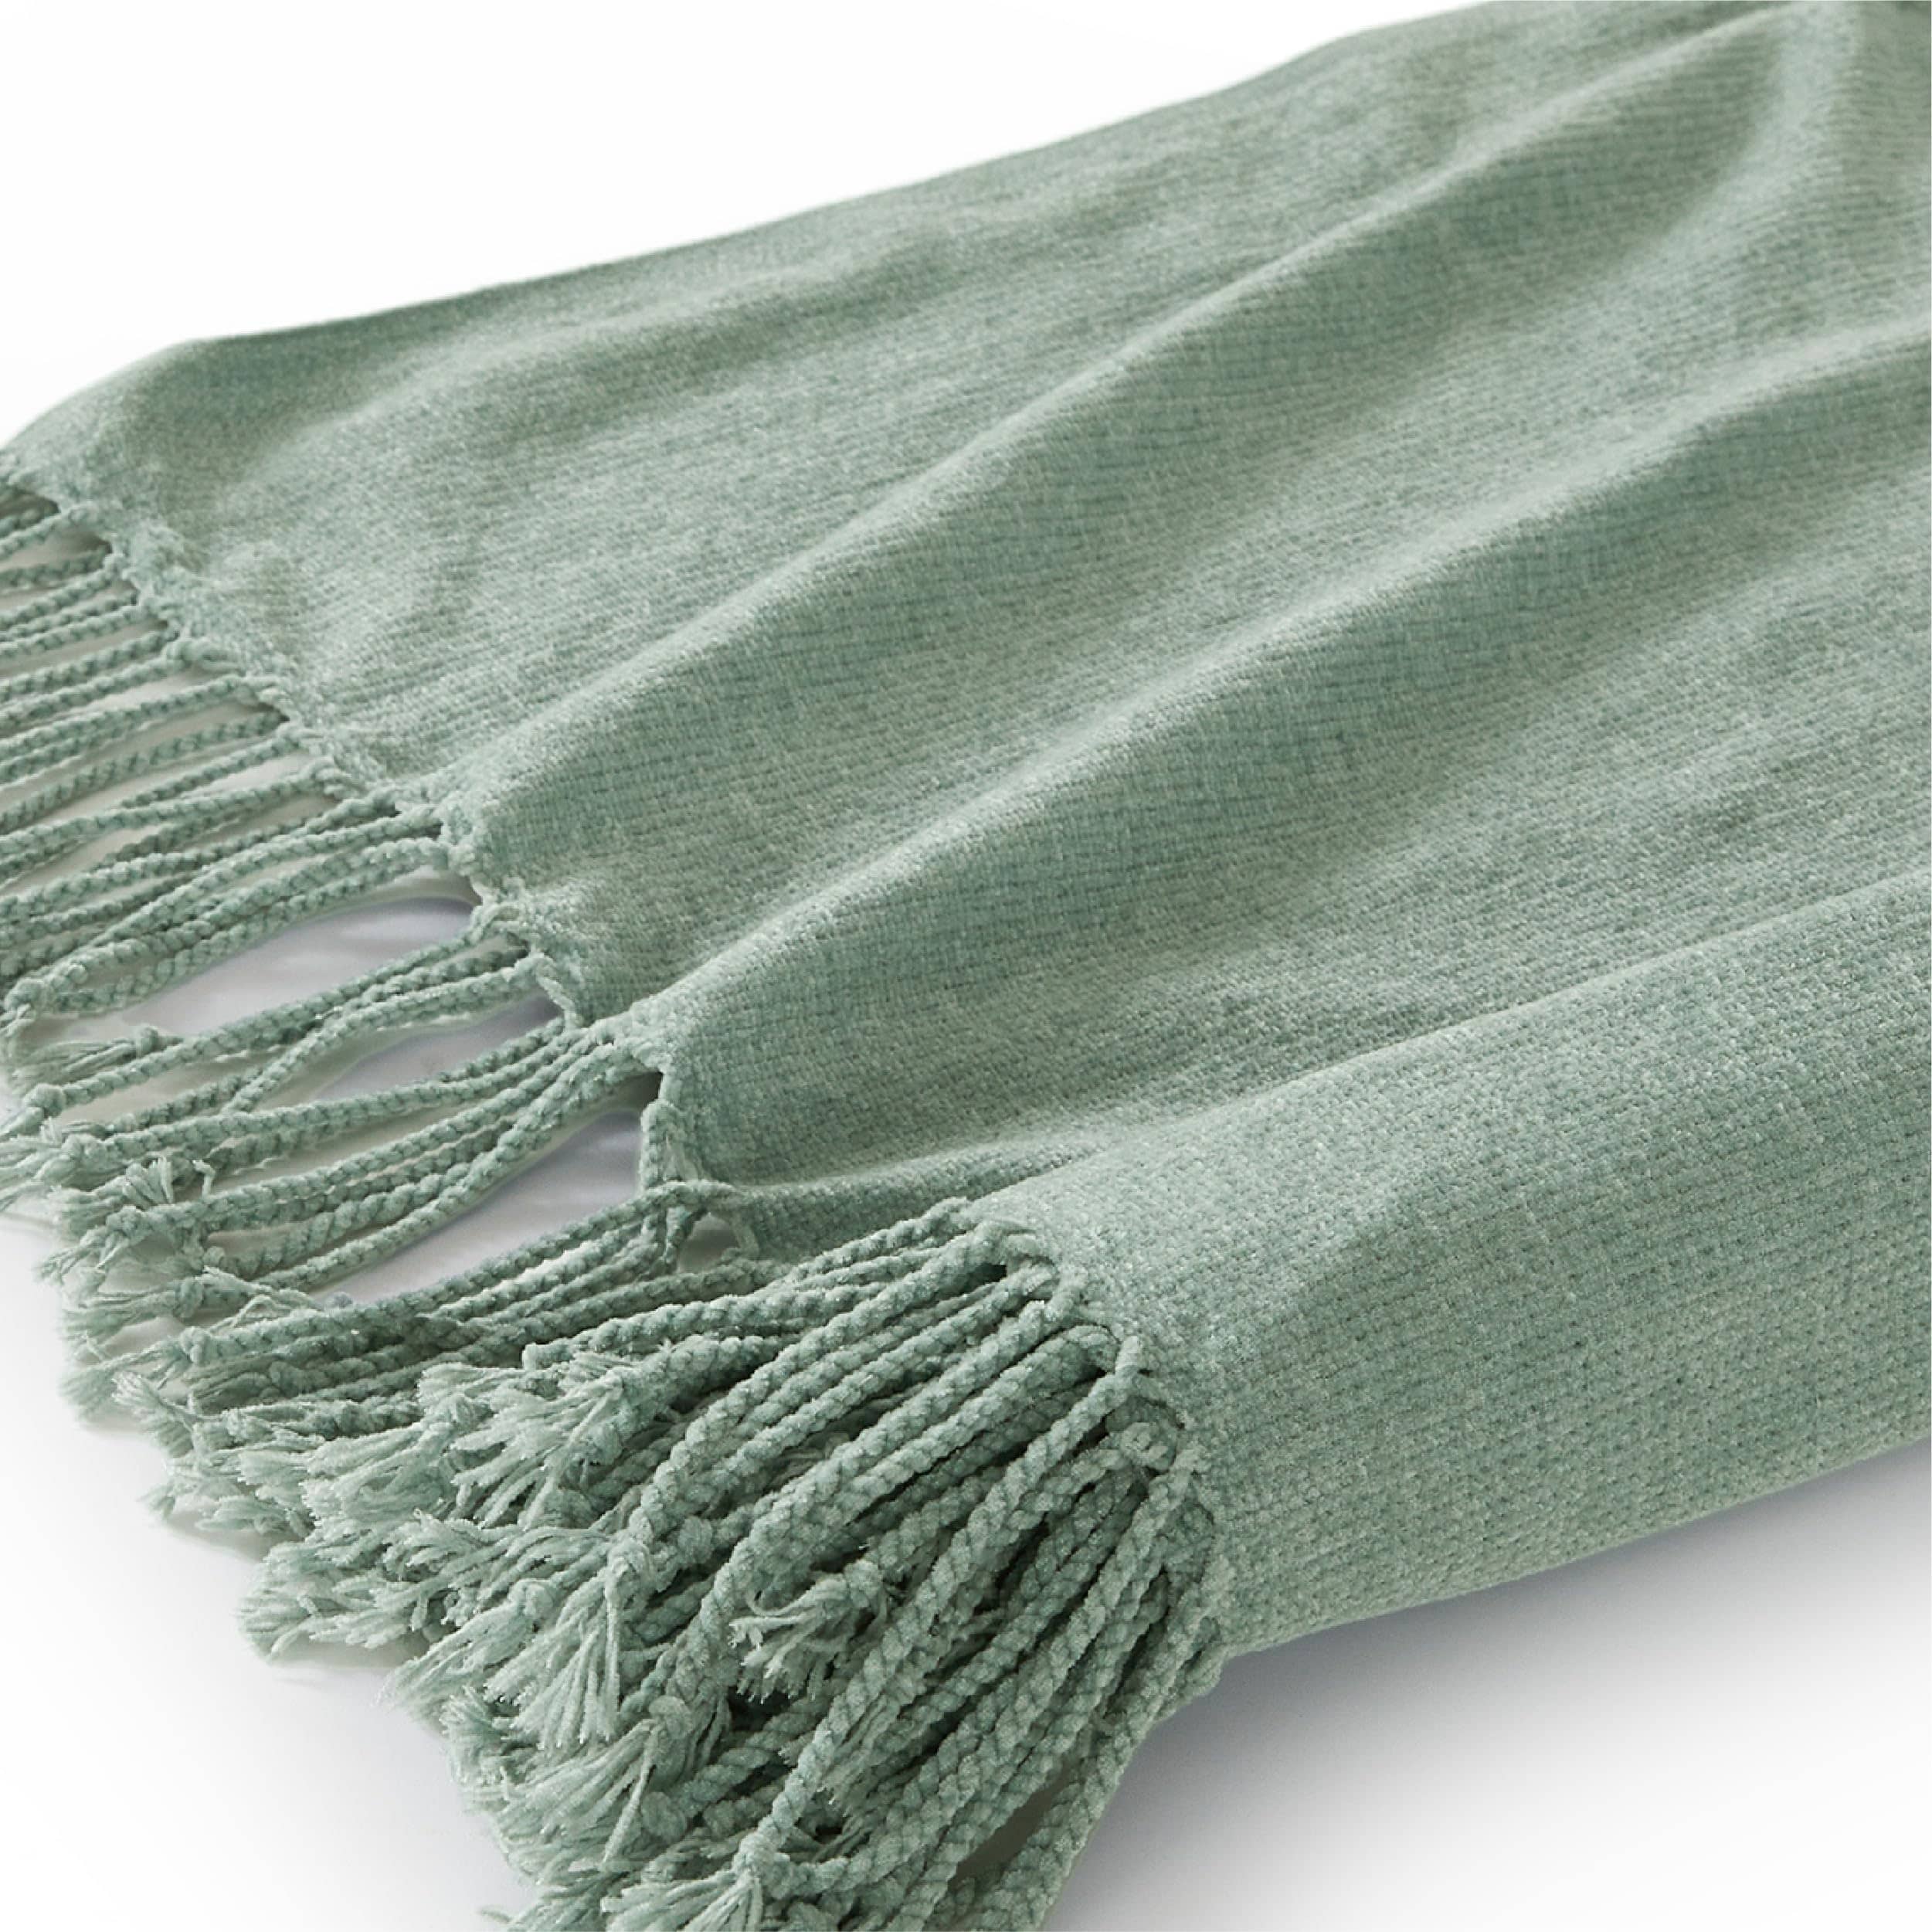 Bedsure Woven Chenille Blanket with Tassels